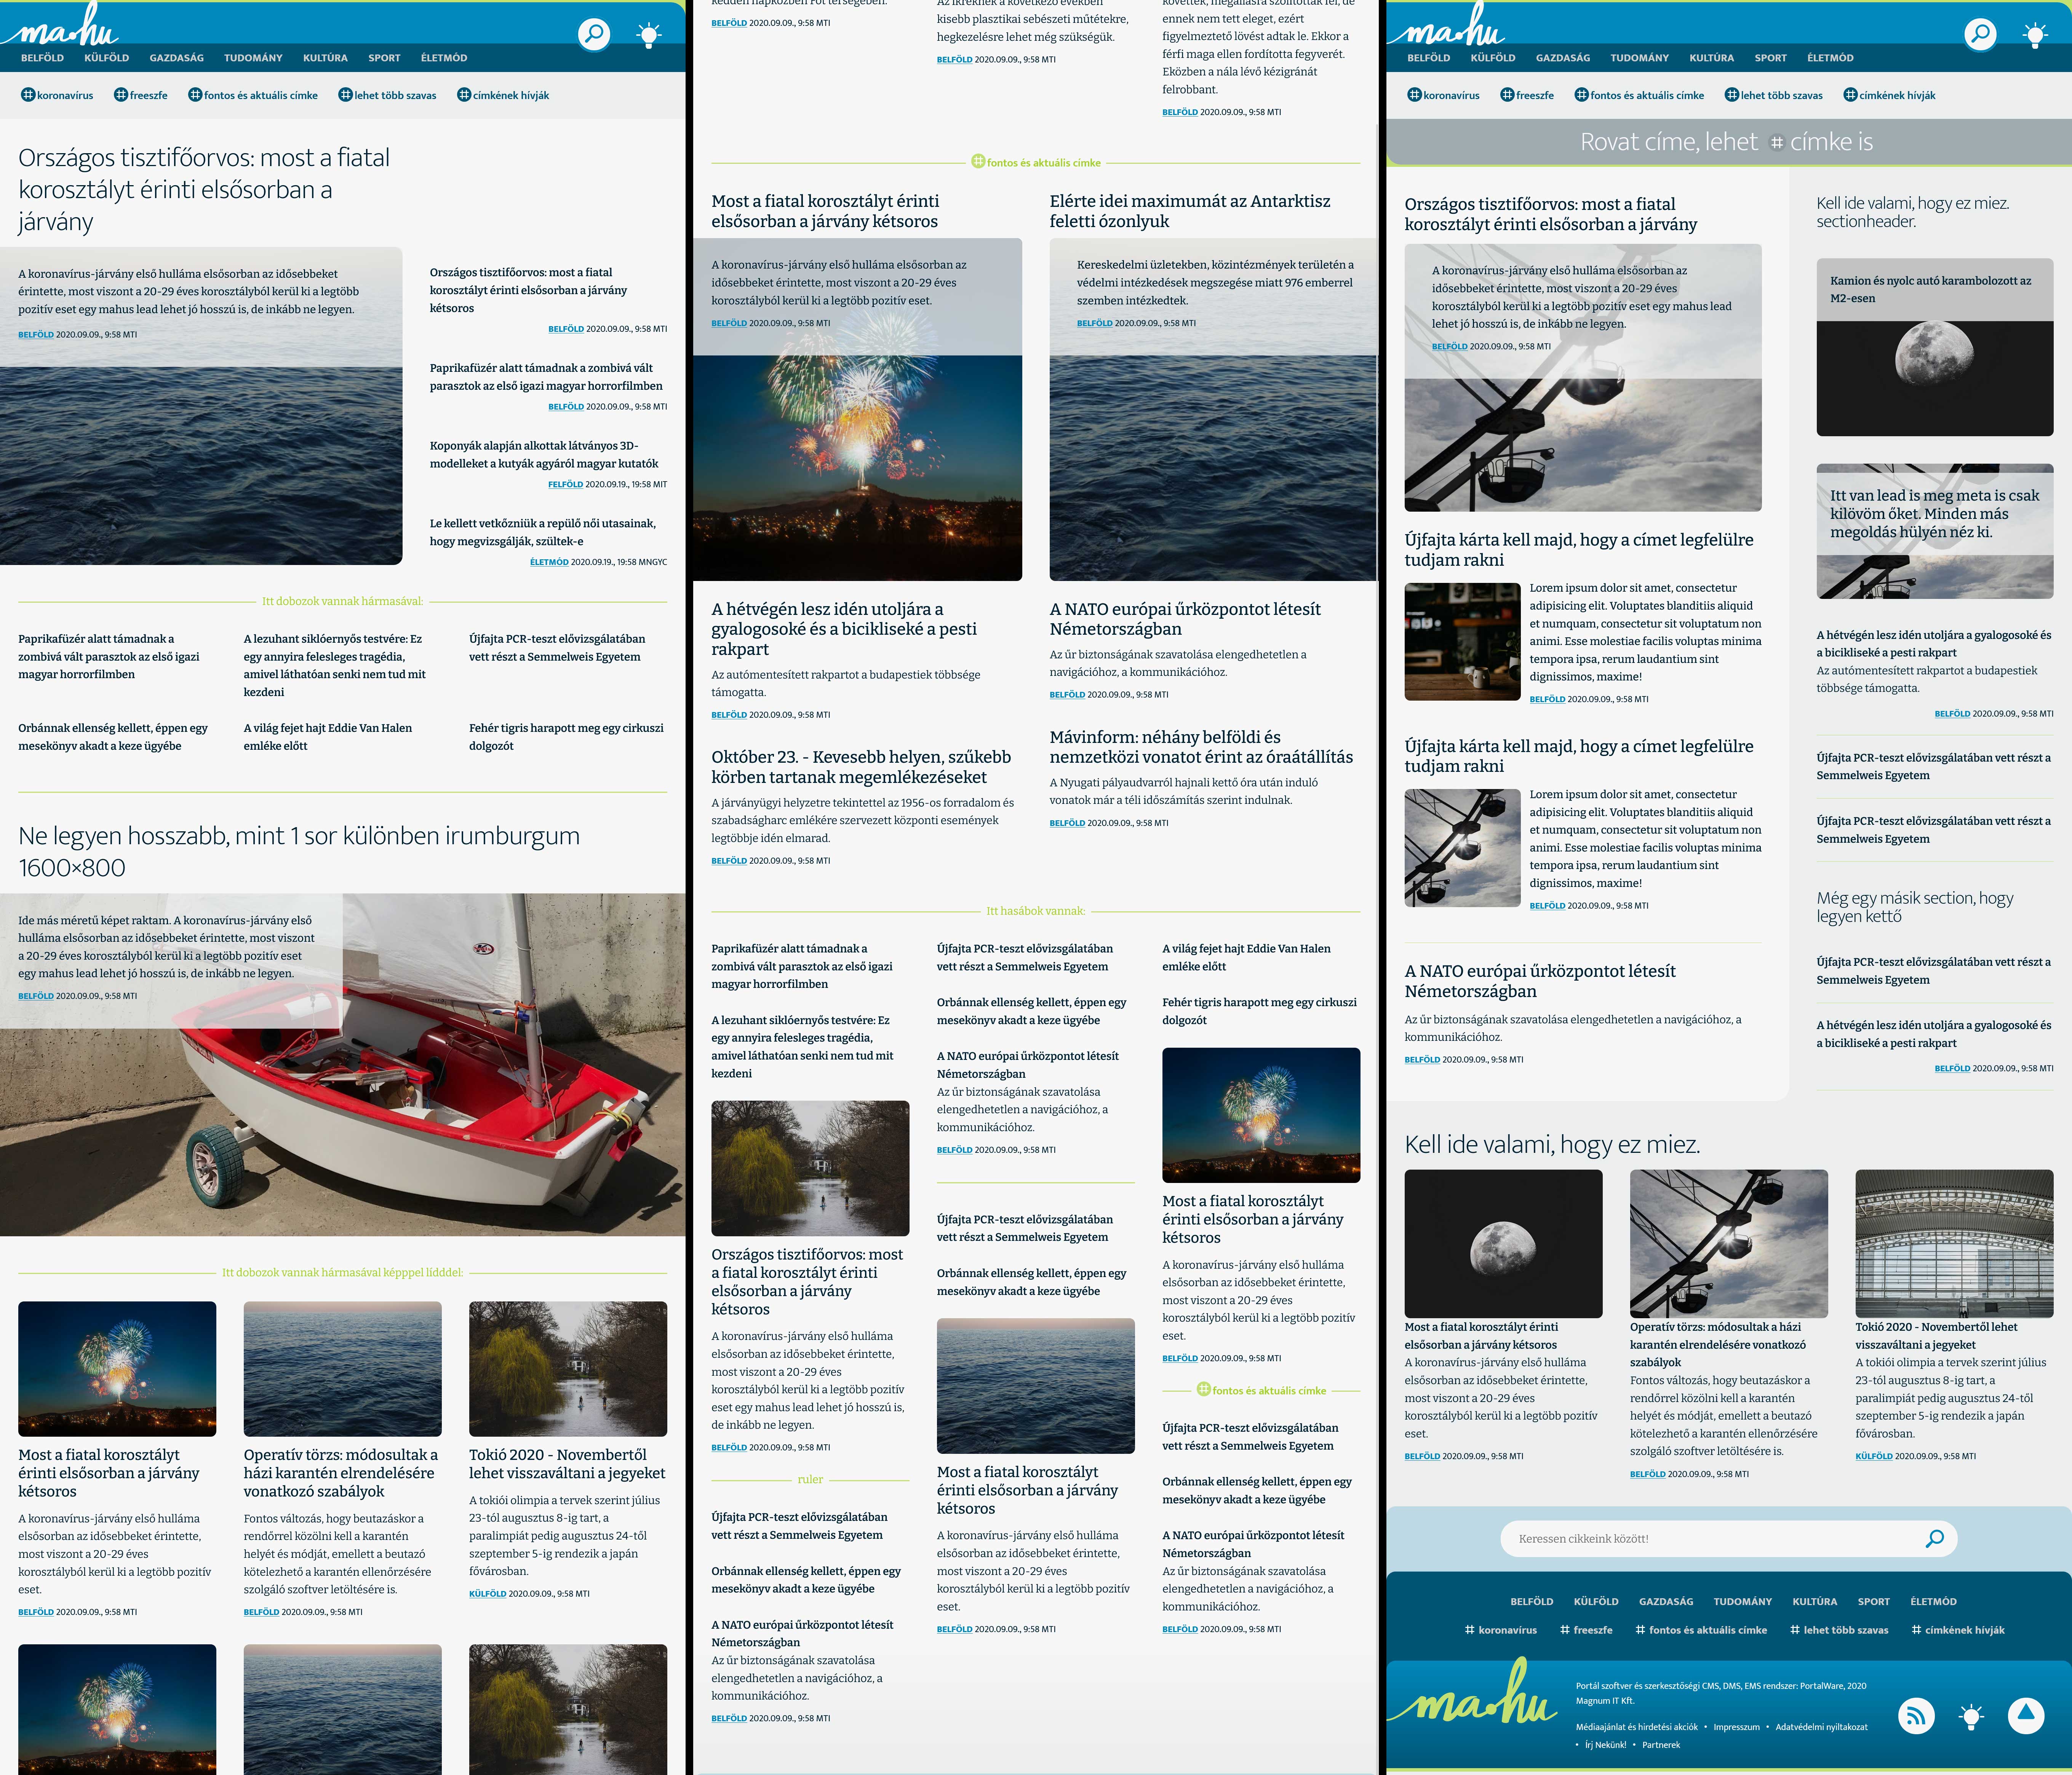 combined view of different pages of the site